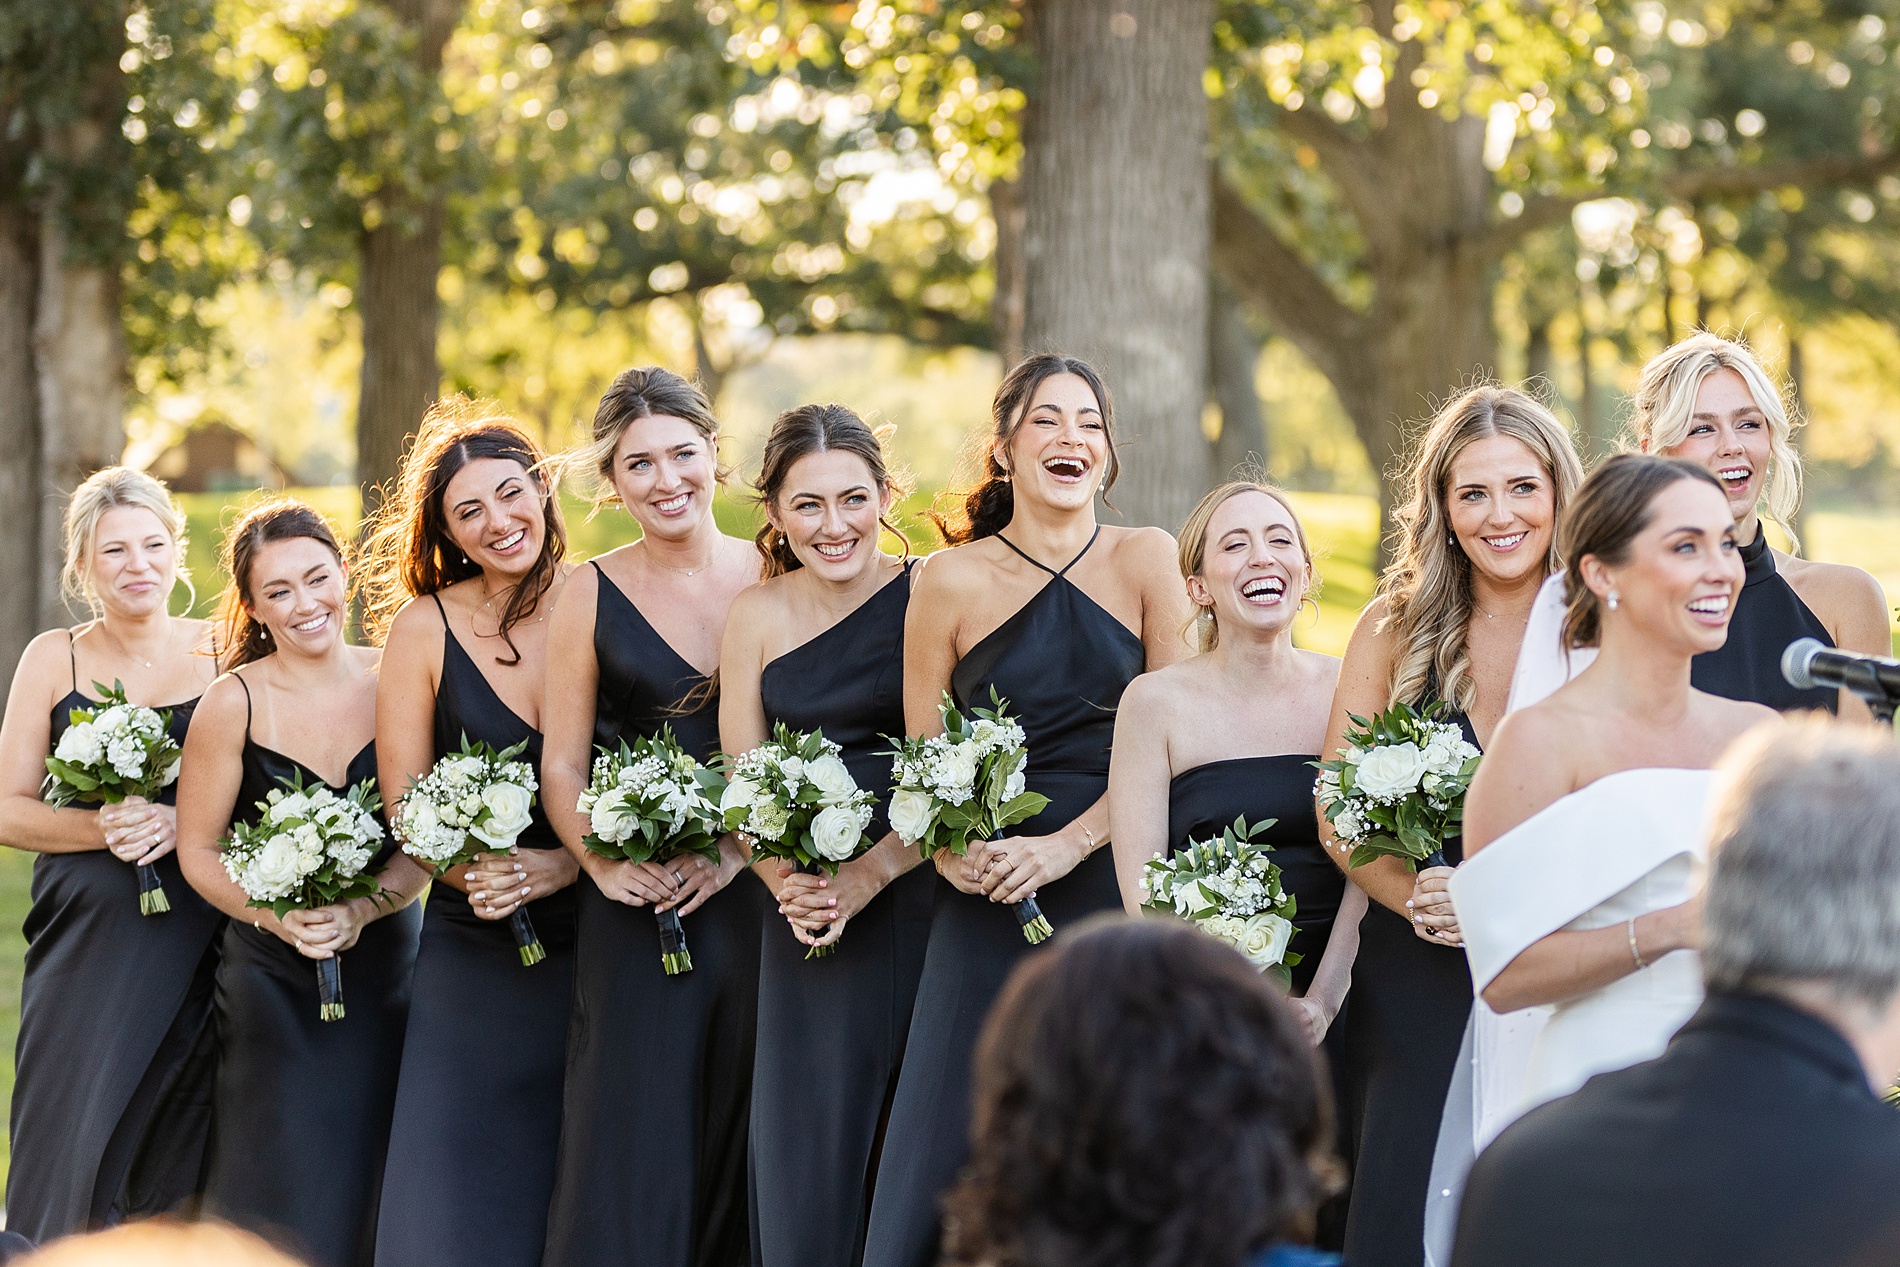 candid portraits of bridesmaids at wedding ceremony